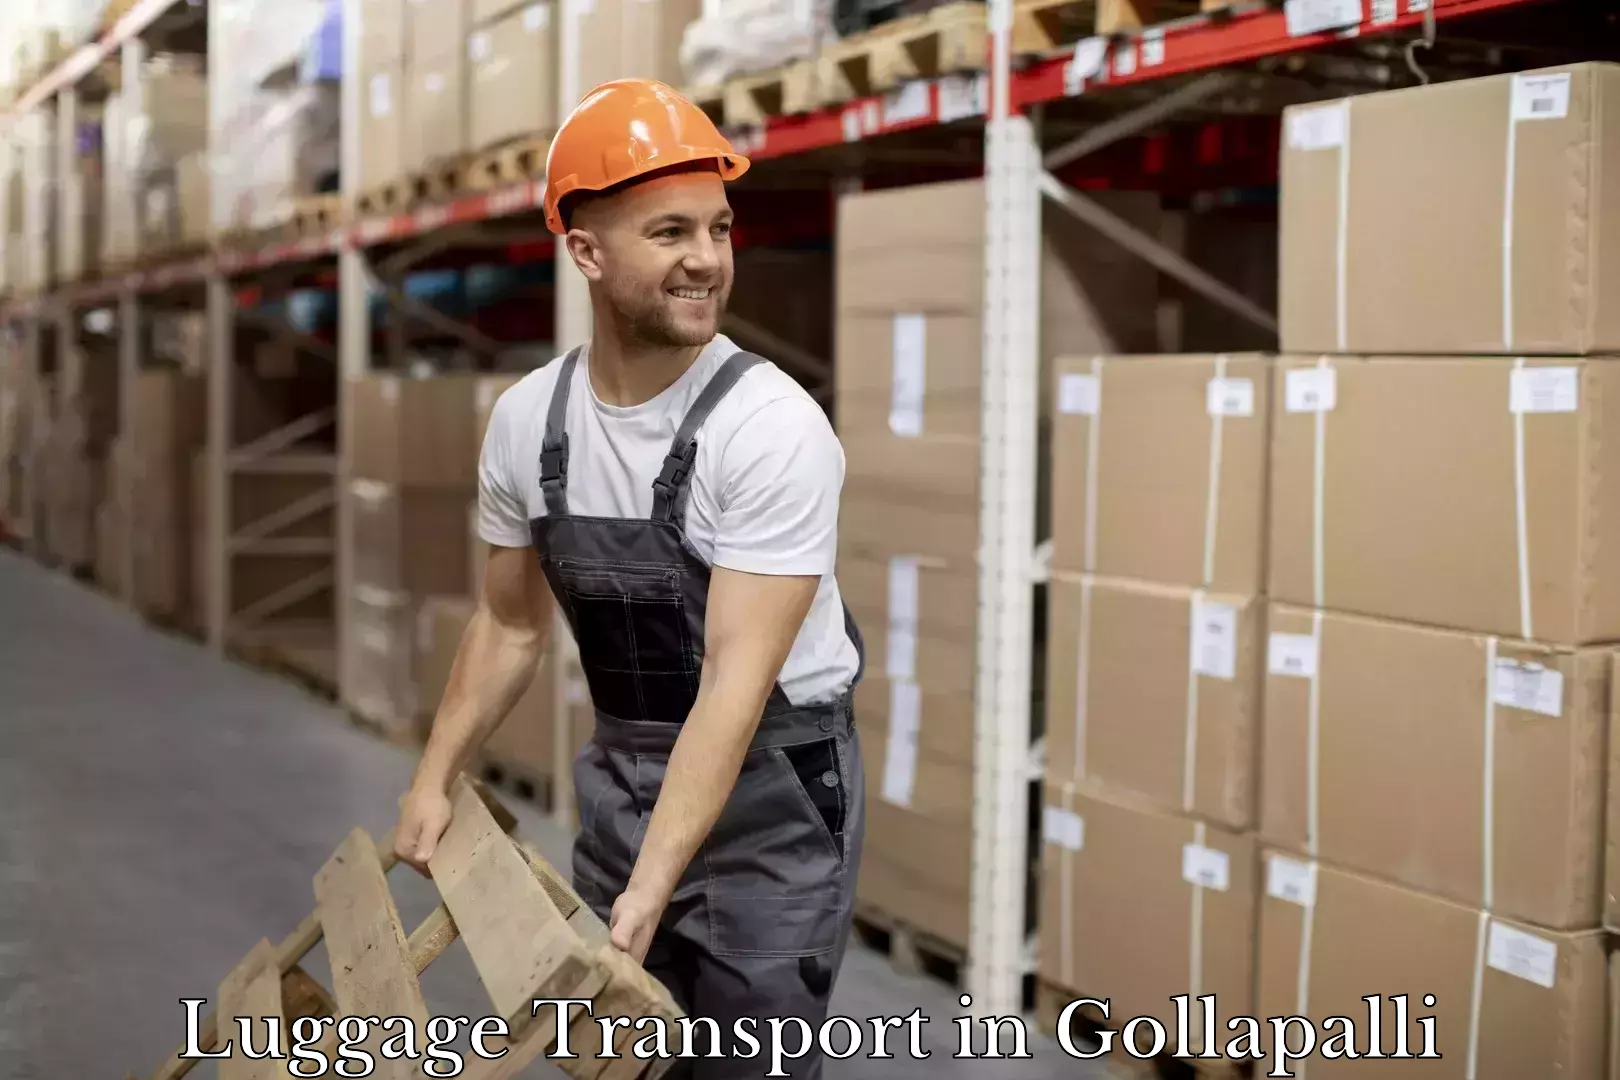 Baggage transport services in Gollapalli